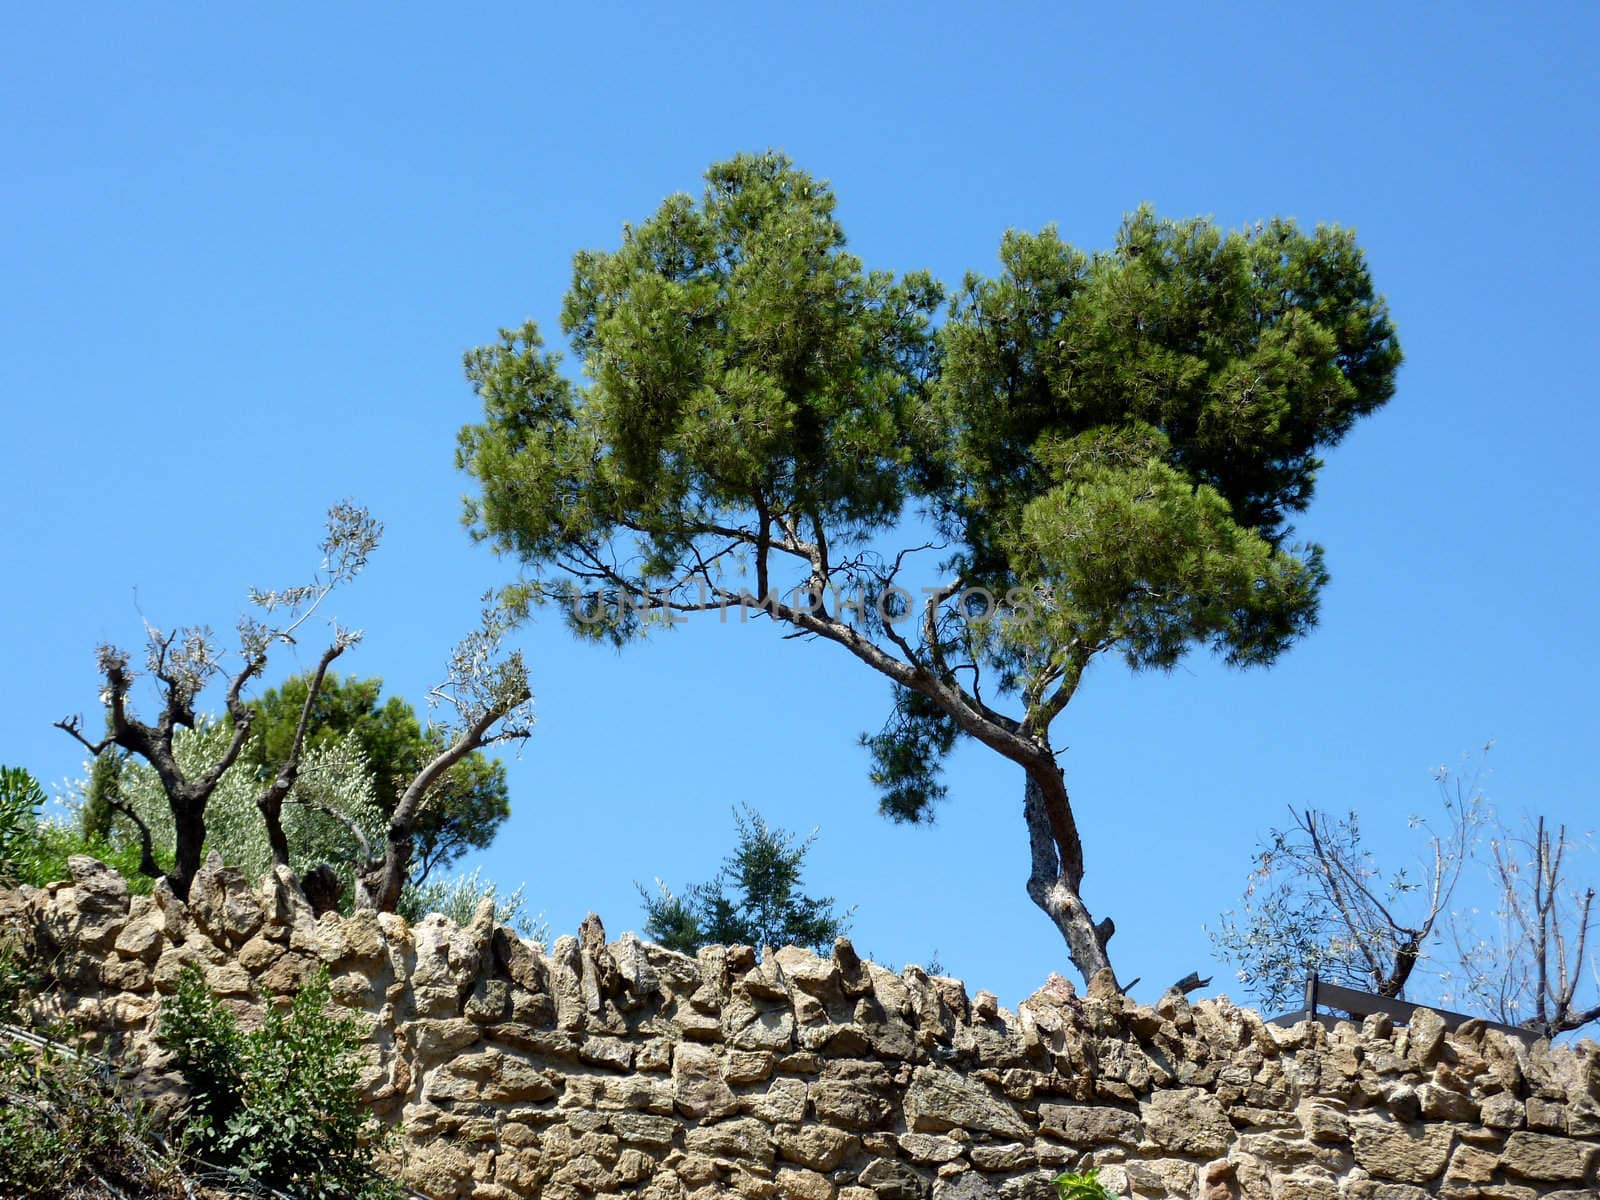 Tree upon a wall made of bricks and surrounded by vegetation